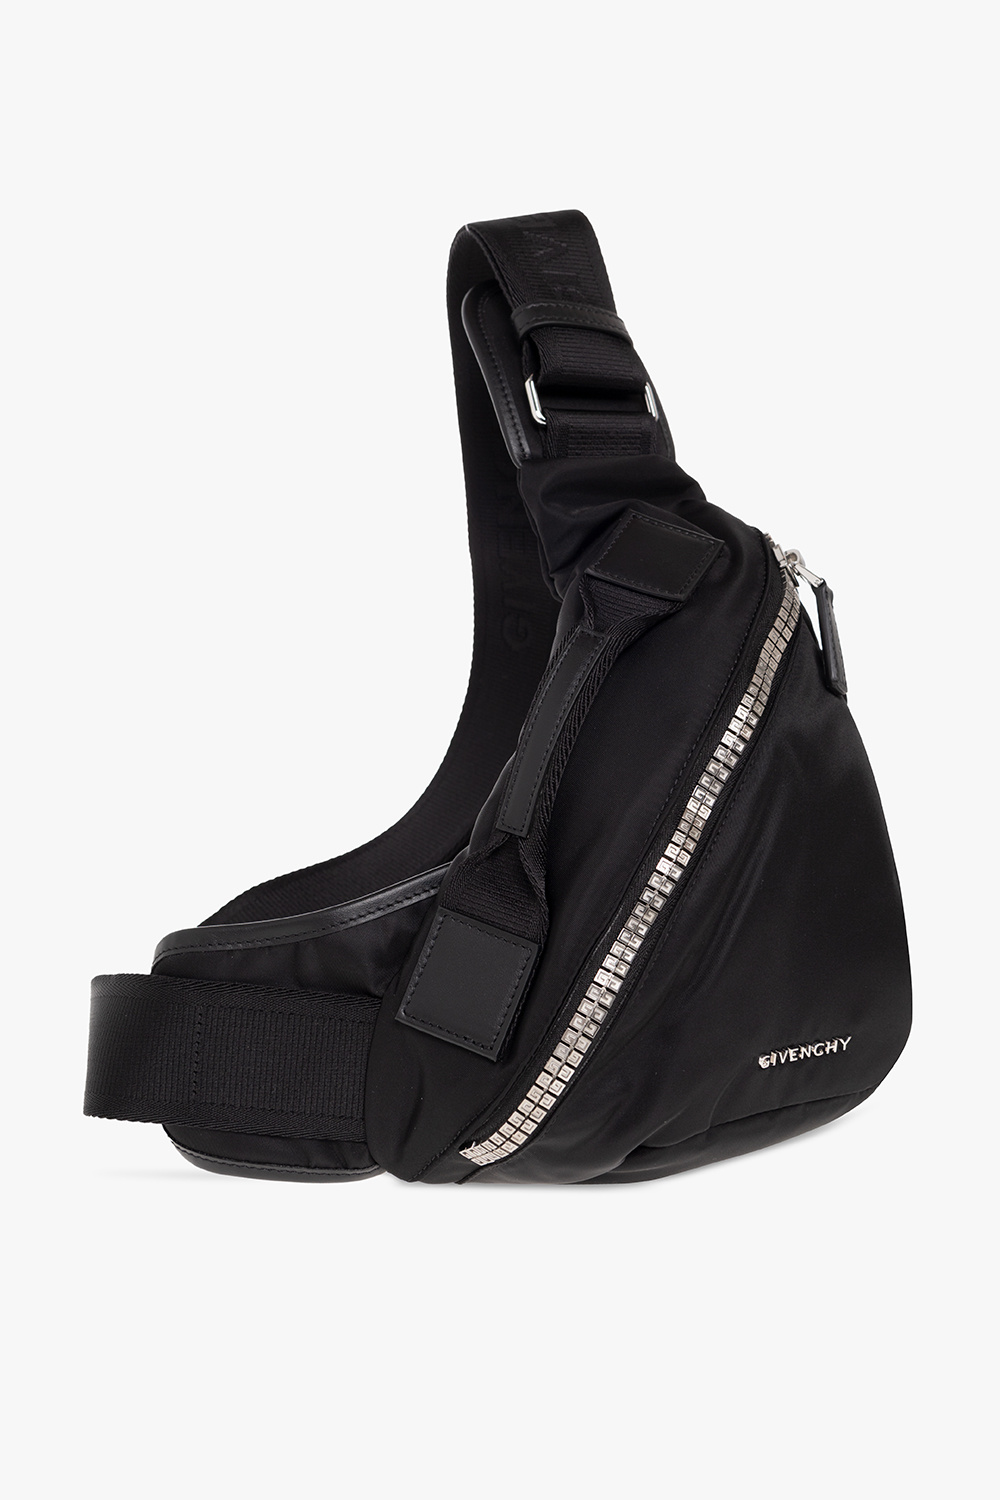 Givenchy ‘Triangle Small’ shoulder bag